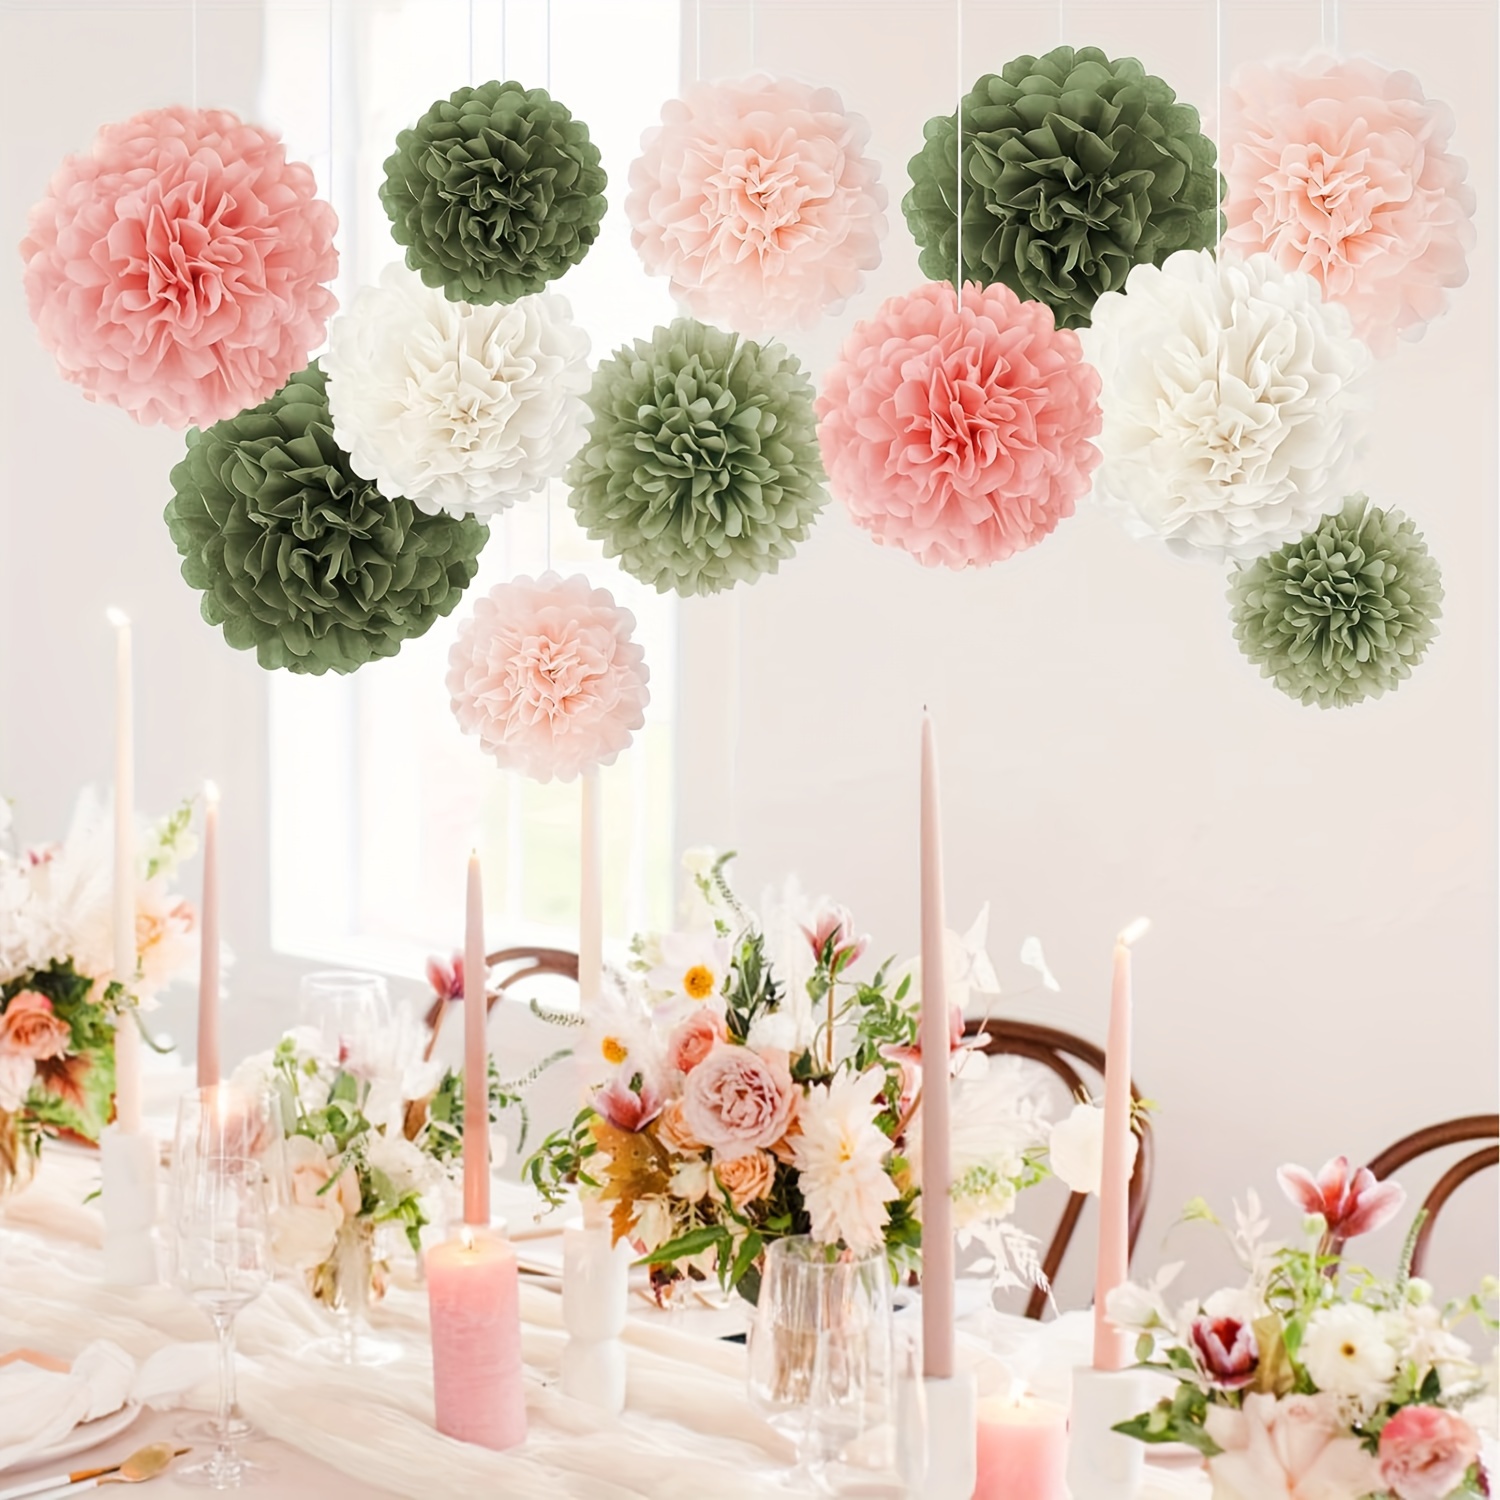 

Elegant Paper Pom Pom Decorations: Set Of 12 In White, Pink, And Green For Festive Occasions - Perfect For Birthdays, Weddings, And More